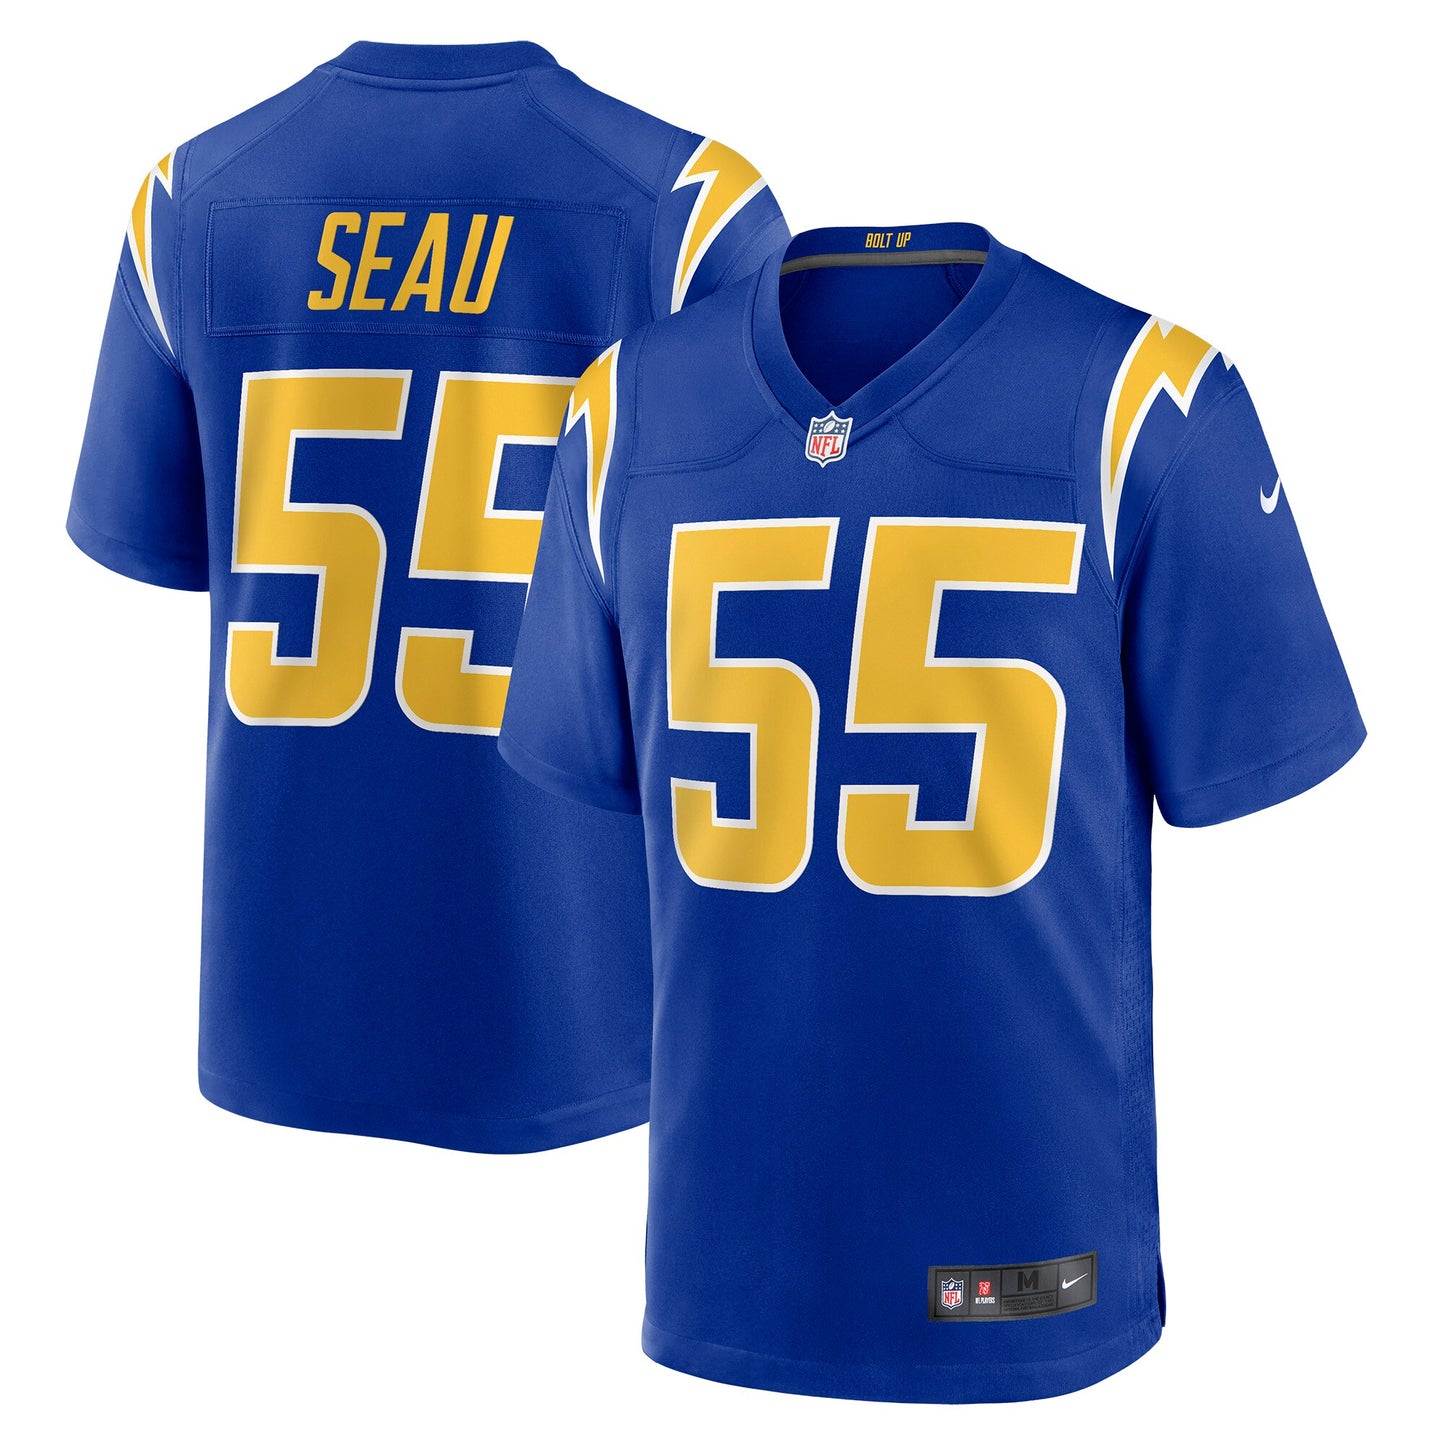 Junior Seau Los Angeles Chargers Nike Retired Player Alternate Game Jersey - Royal